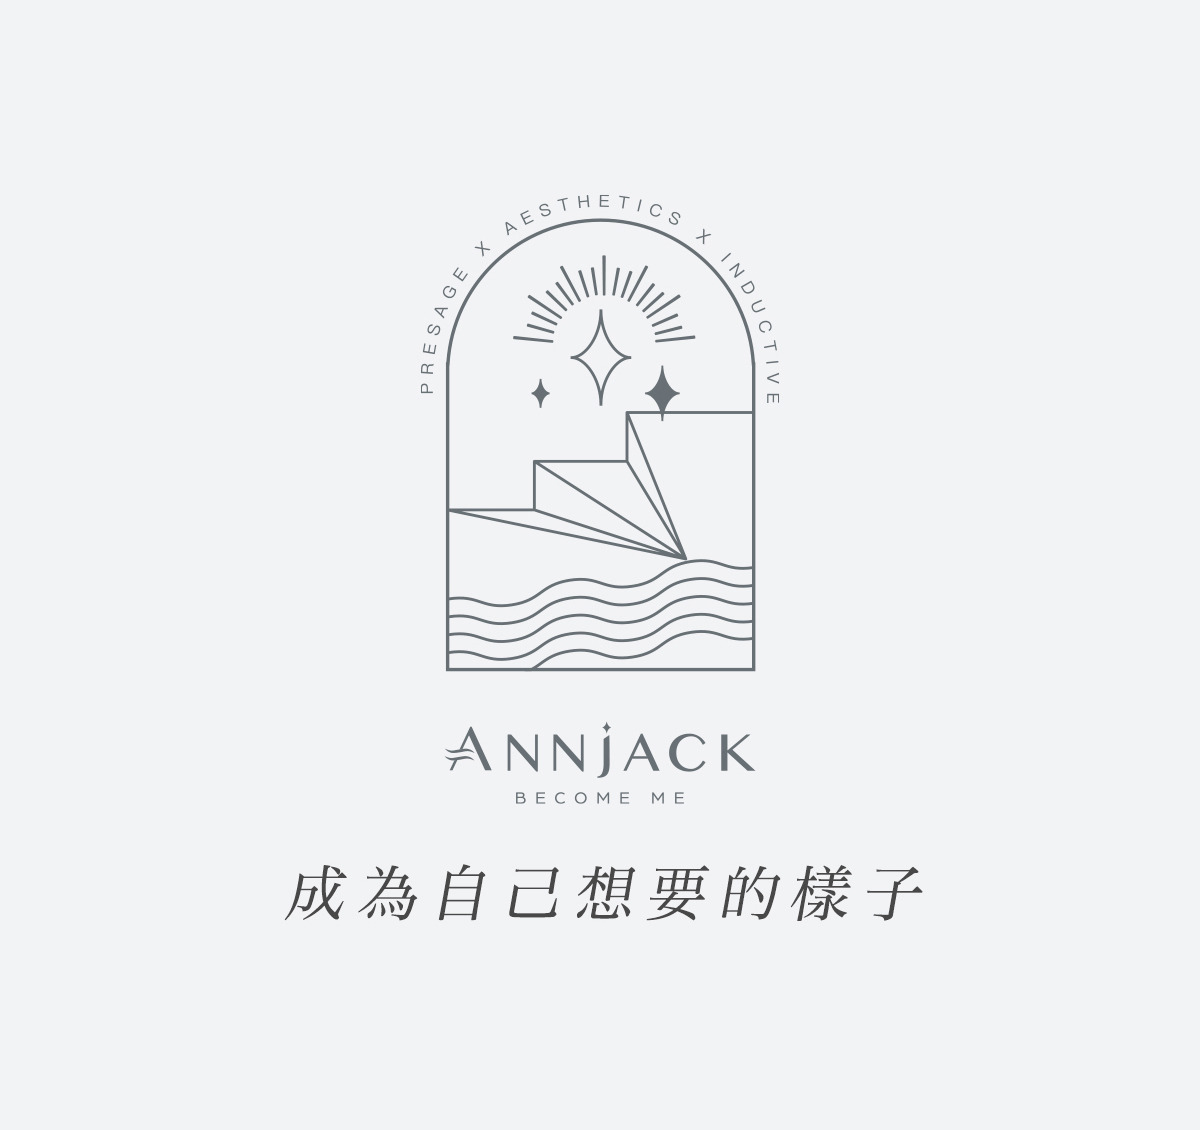 ANNJACK,health food, maintenance, nutrition, product, story, beauty, premonition, feeling, metabolism, nutritionist